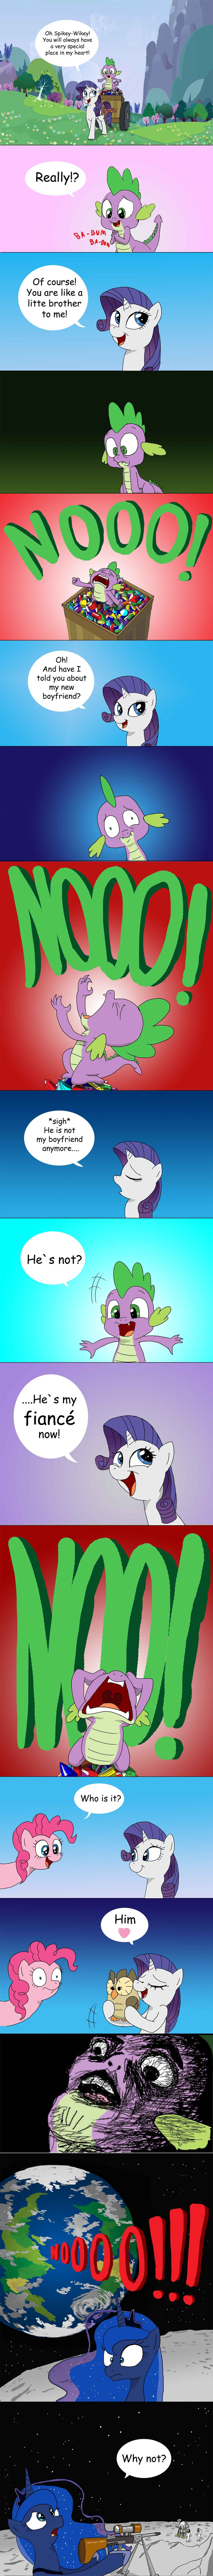 img-1126177-1-about_spike_and_rarity_by_